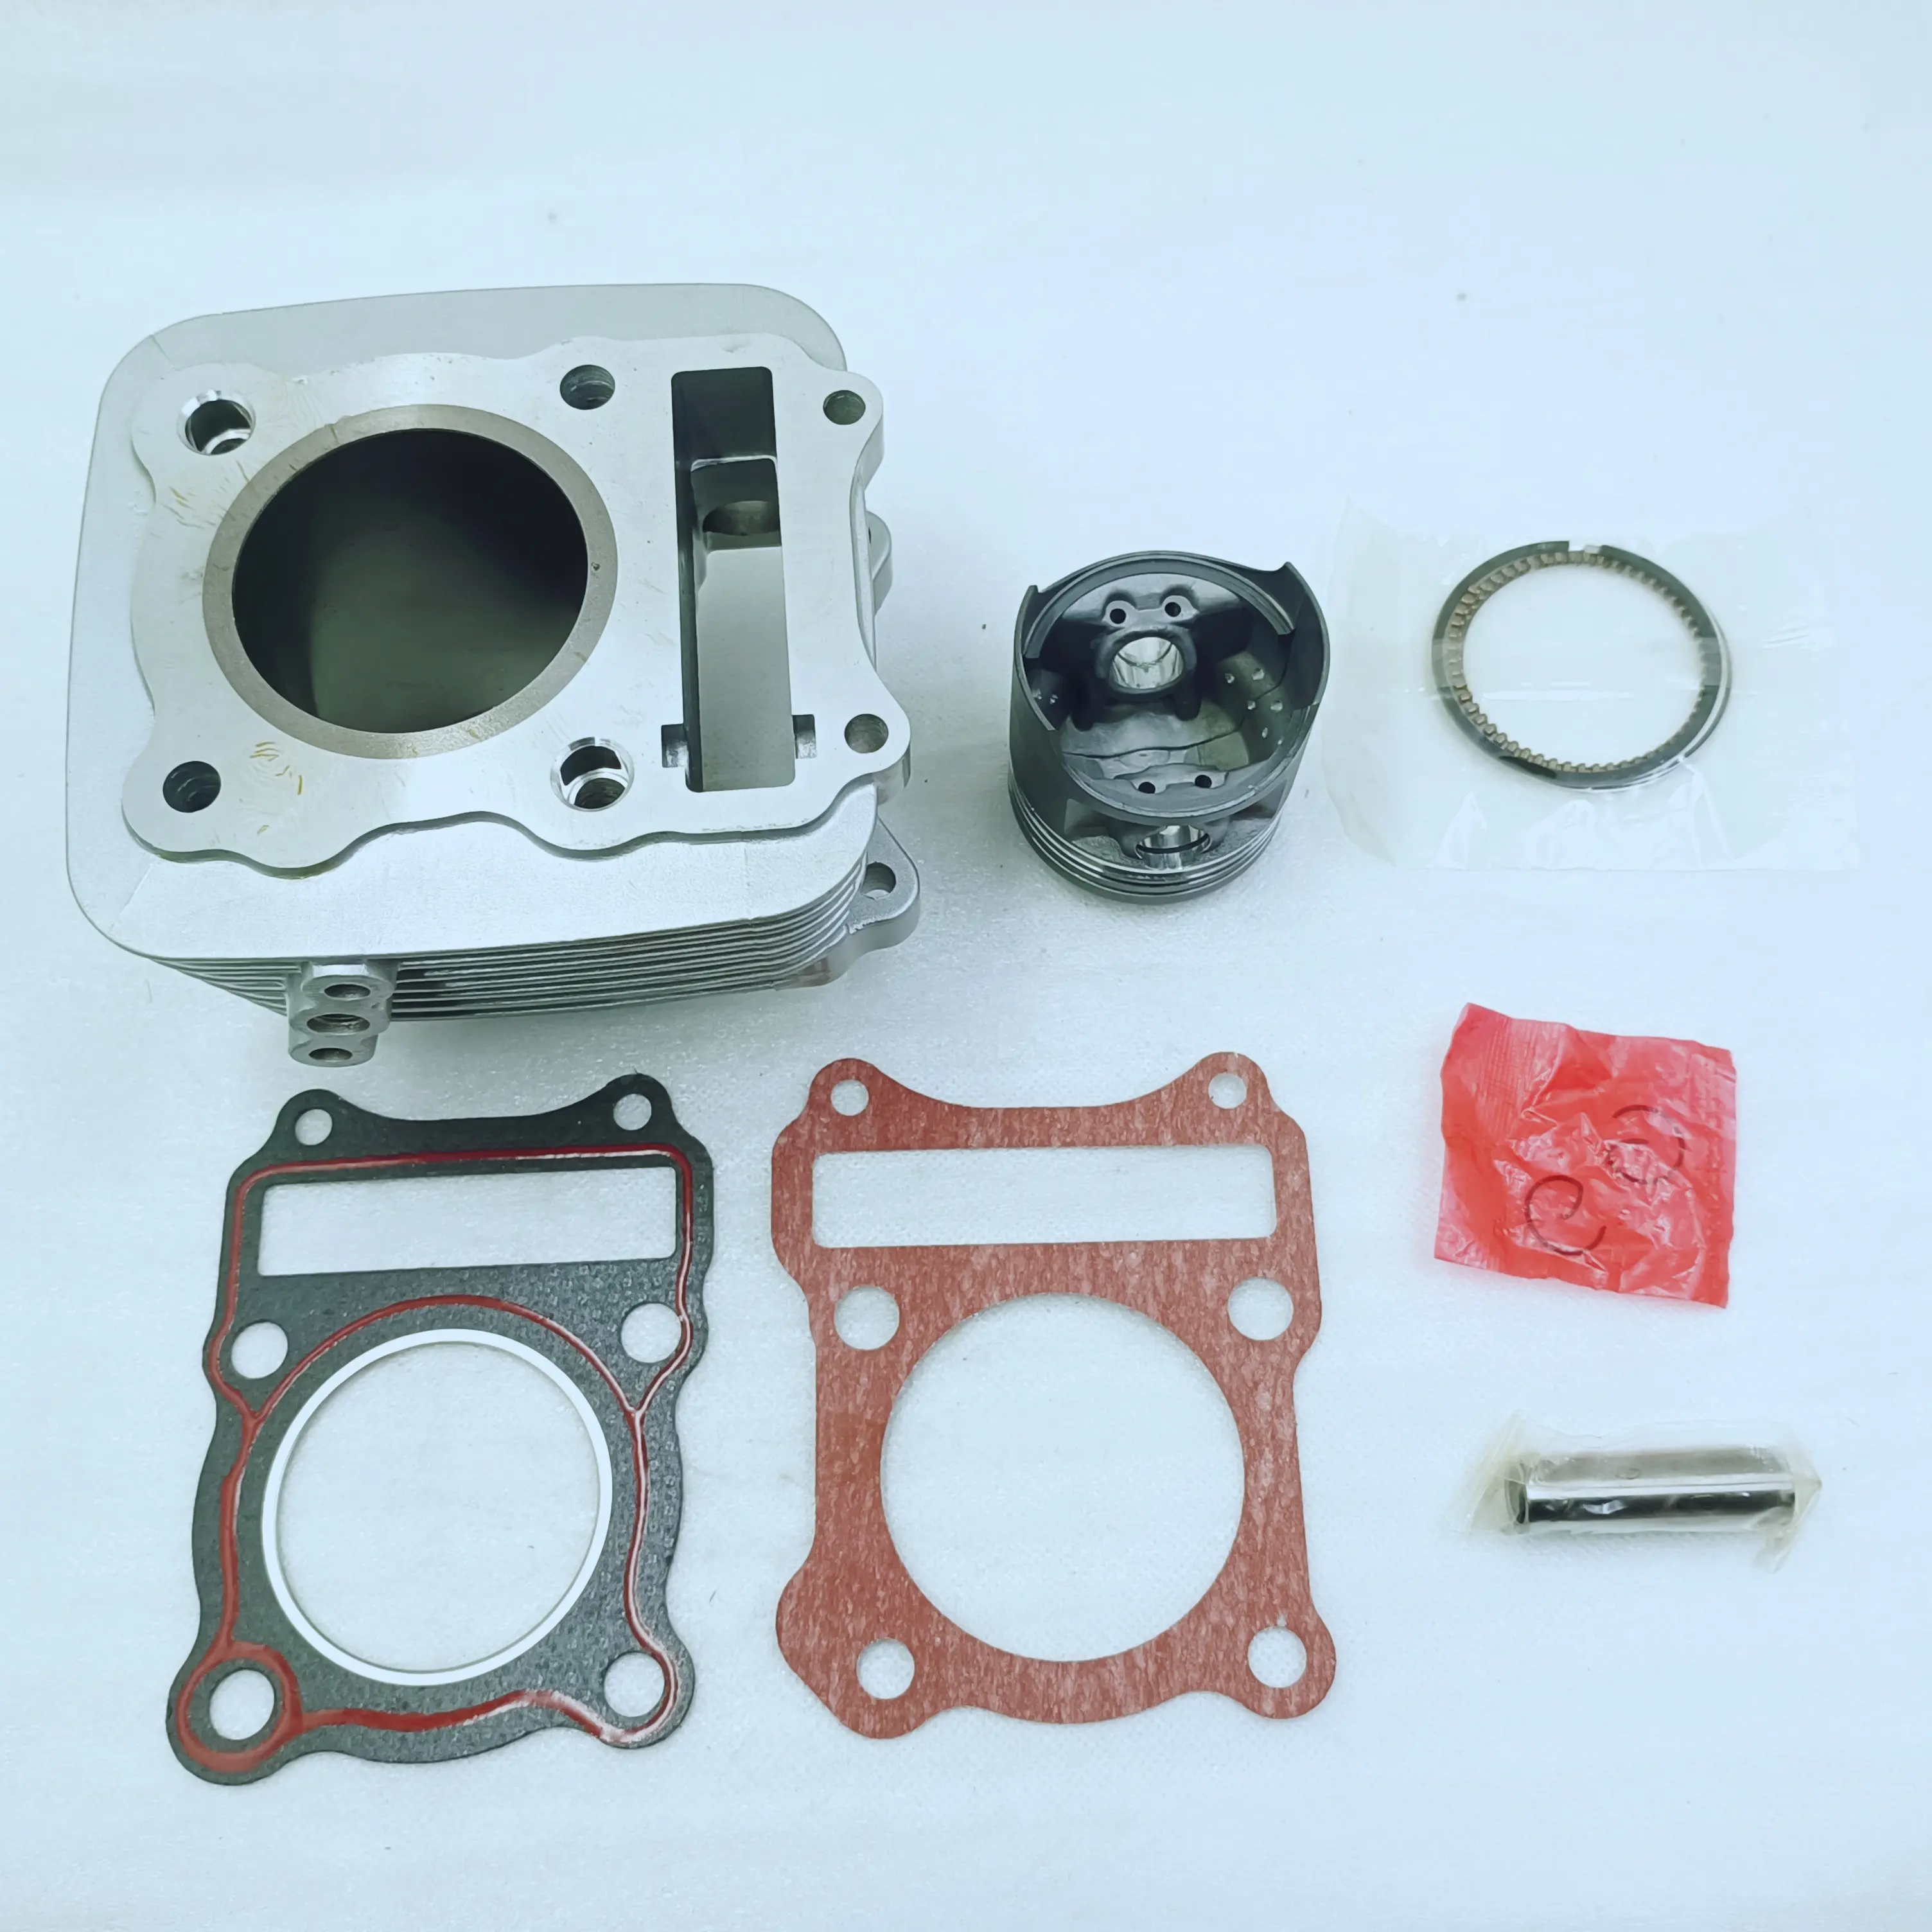 Motorcycle cylinder accessories For Suzuki GN125 motorcycle,gn125 partes, engine block for GN125